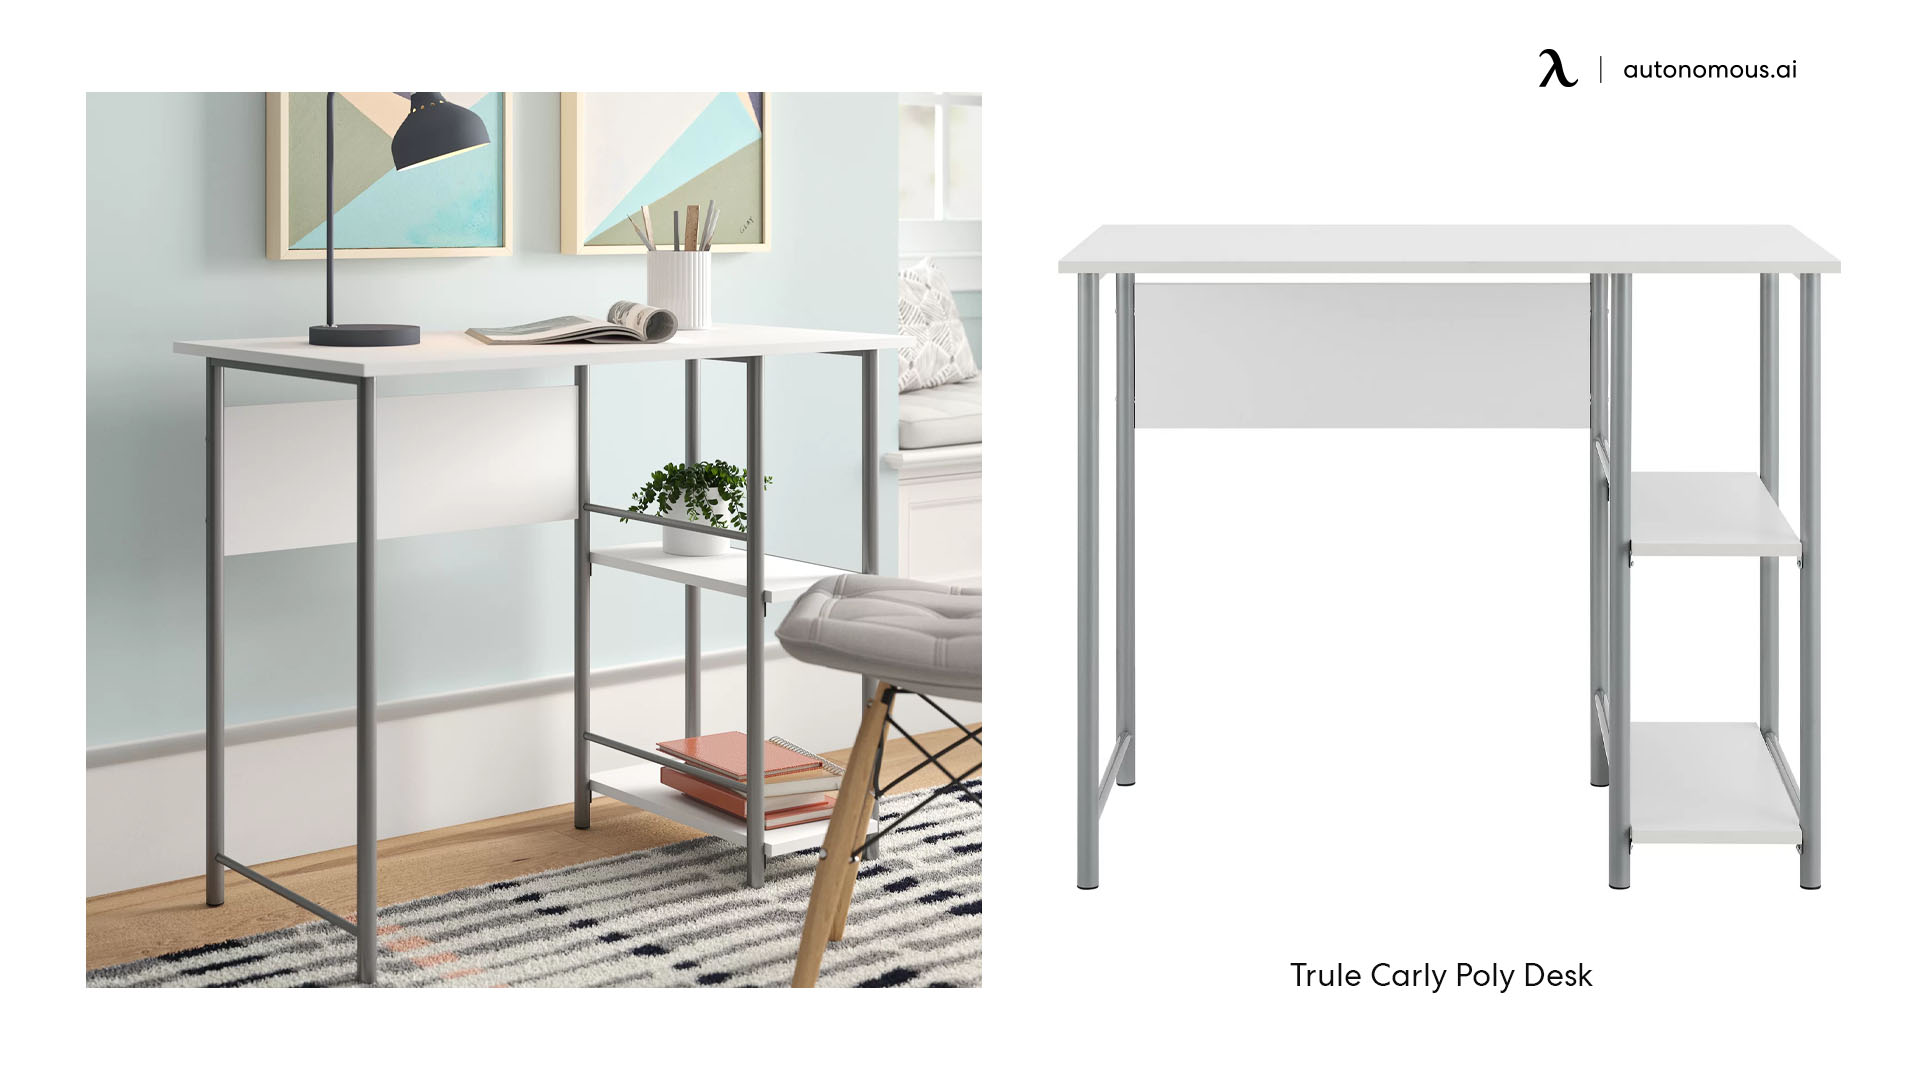 Trule Carly Poly white compact desk